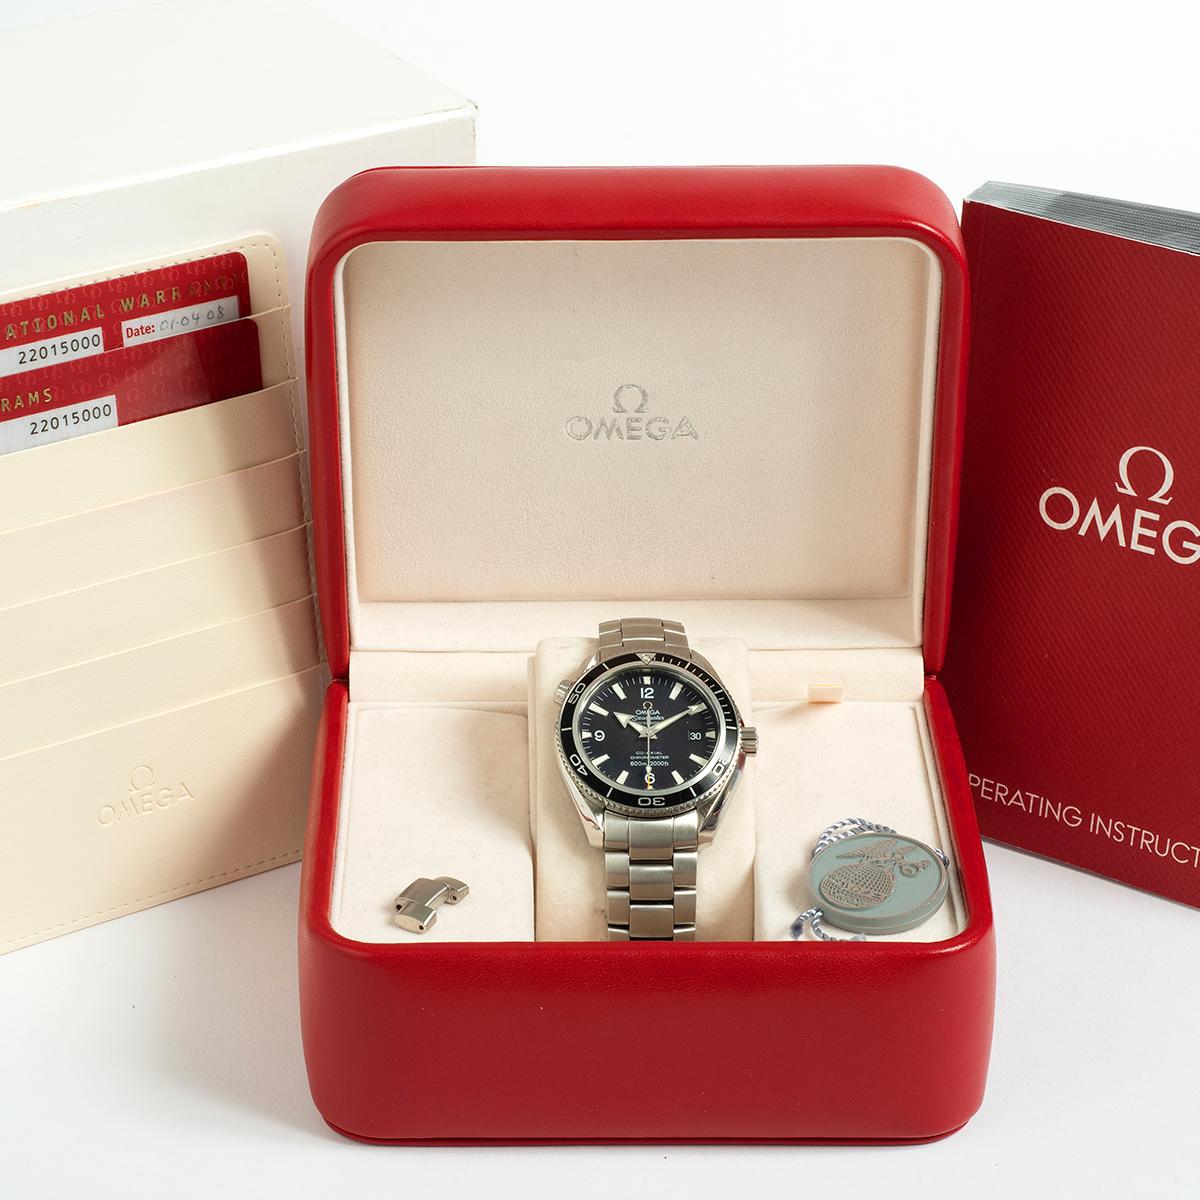 Our classic Omega Seamaster Planet Ocean 600m features a stainless steel 42mm case with stainless steel bracelet and black dial and bezel. Presented in excellent condition, our reference 2201.12.000 comes as a full set complete with inner and outer